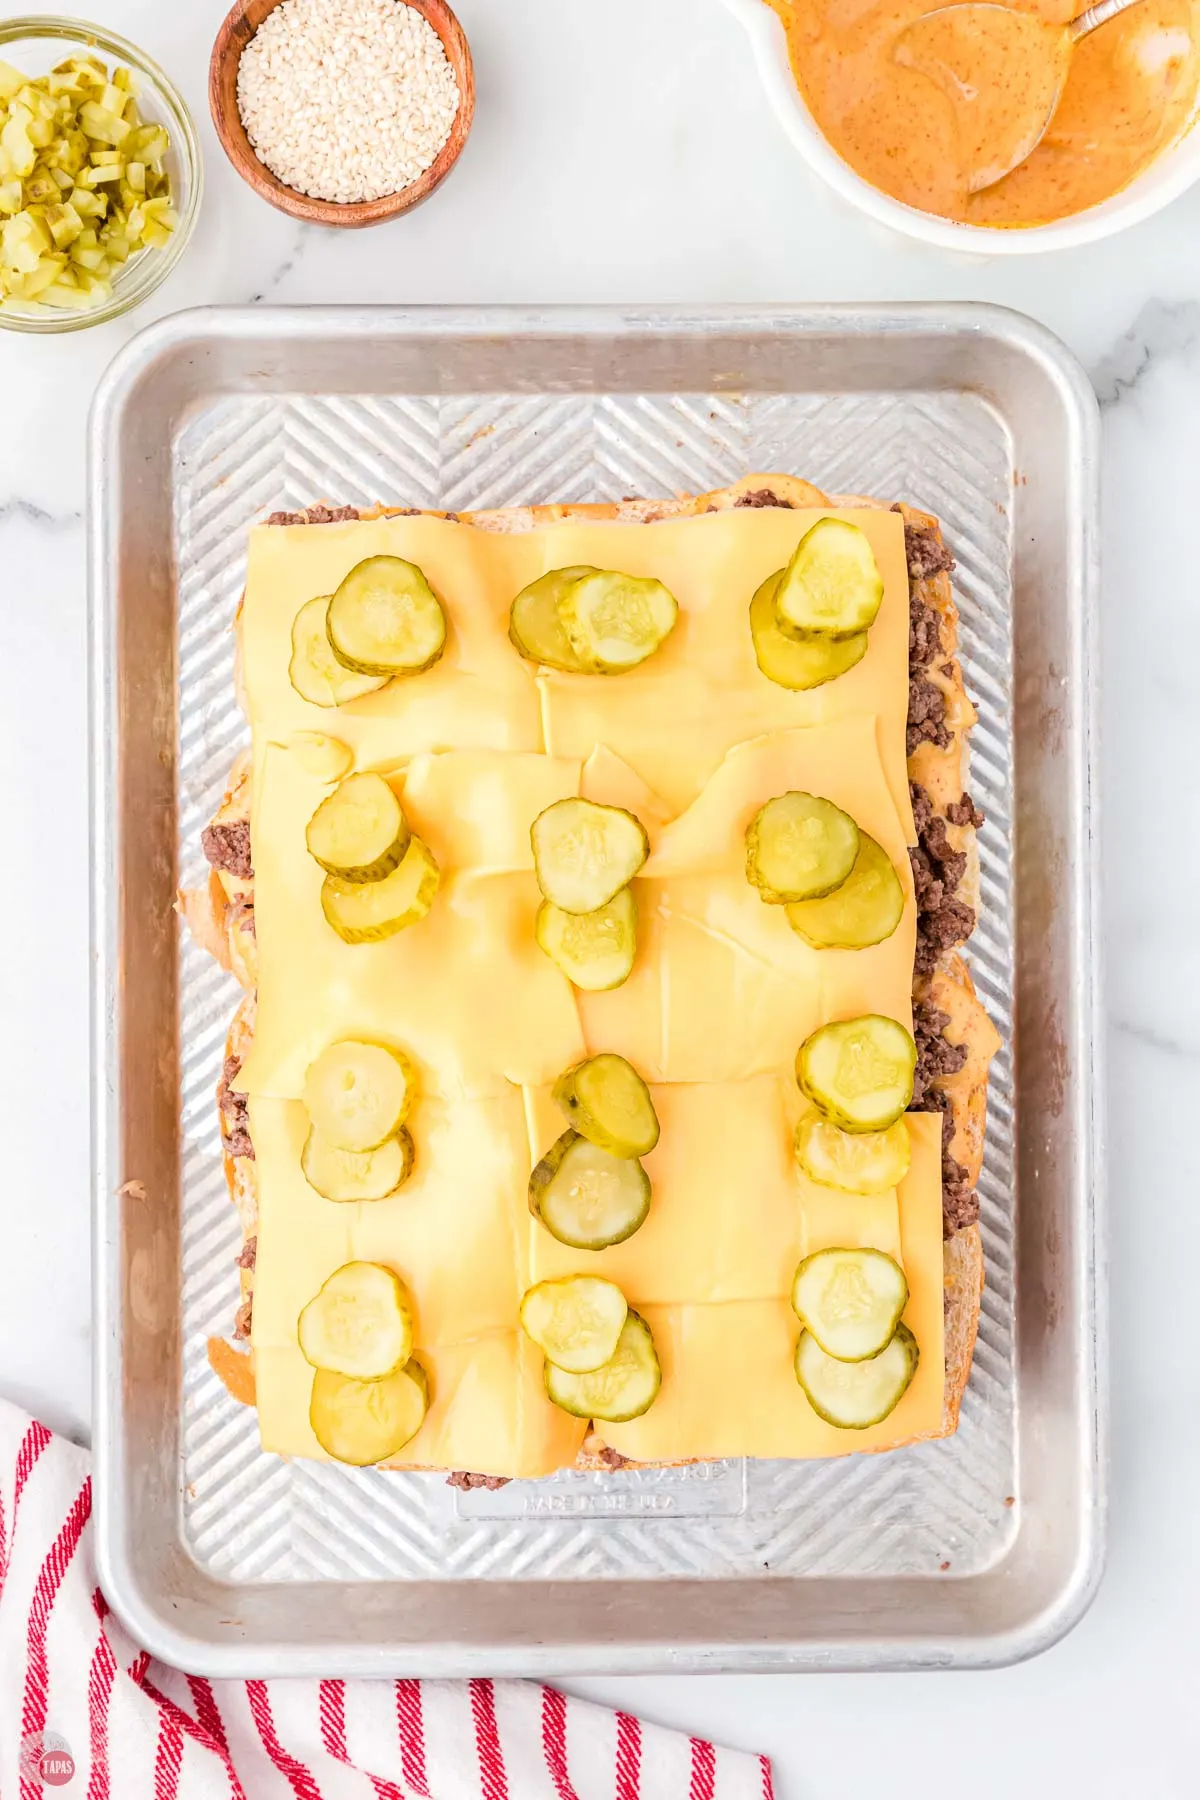 slices of american cheese and pickles on a tray